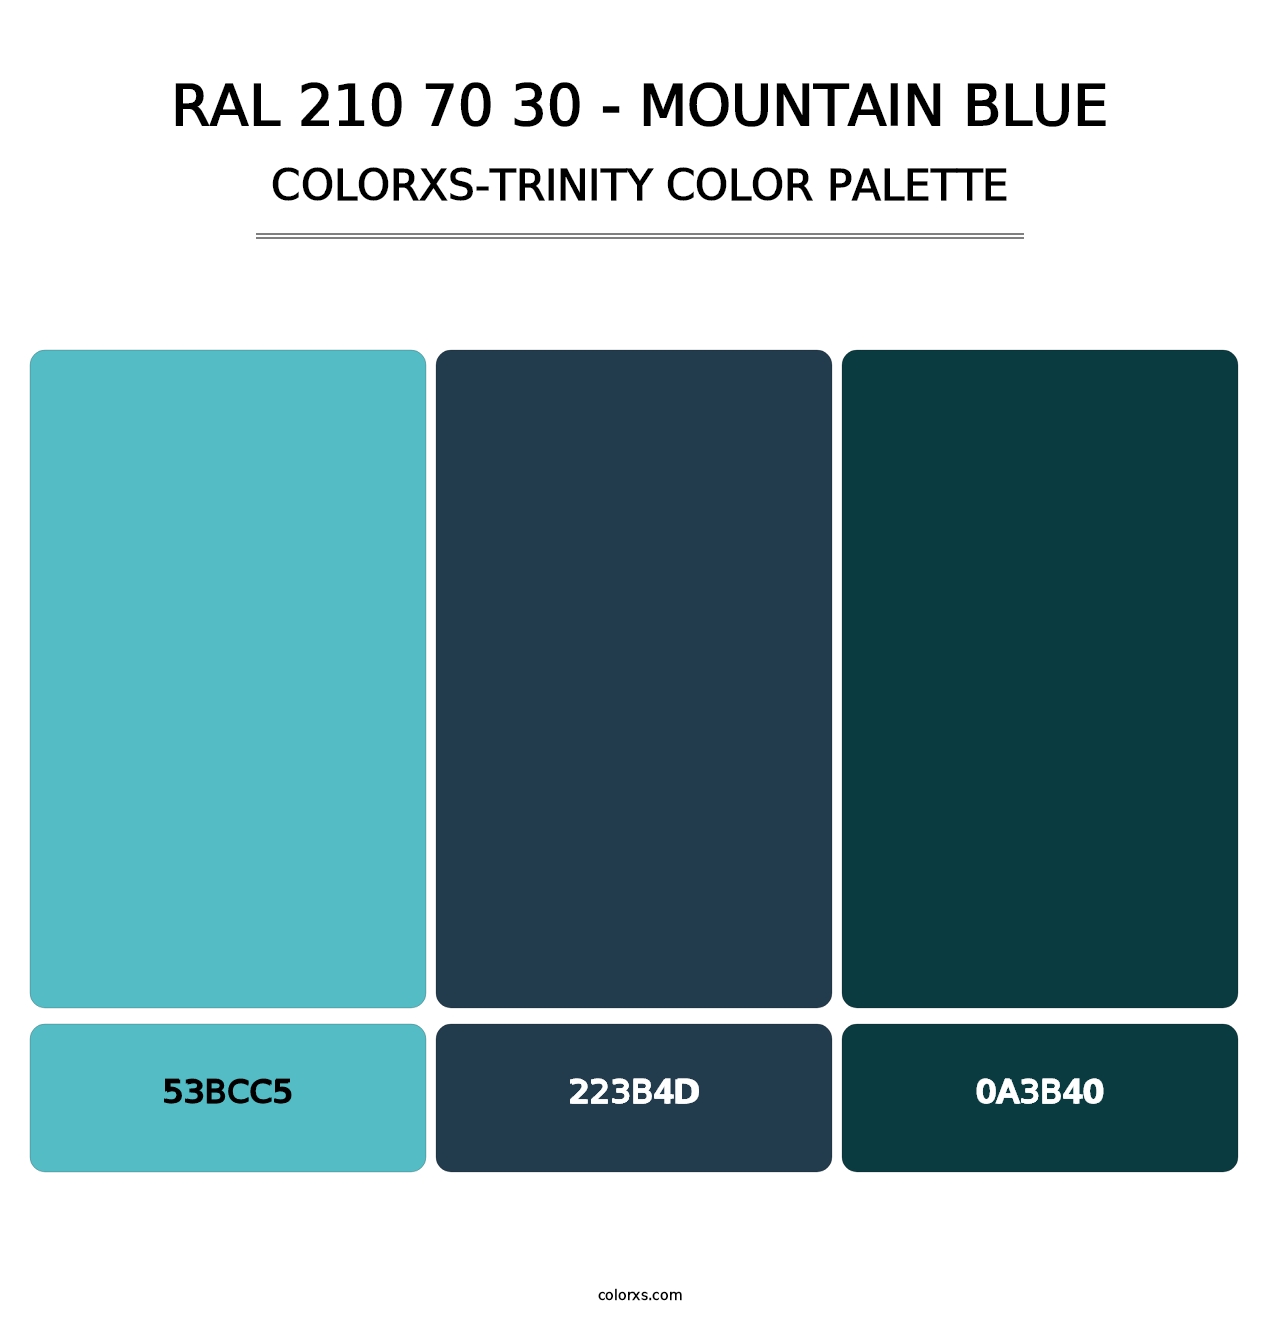 RAL 210 70 30 - Mountain Blue - Colorxs Trinity Palette